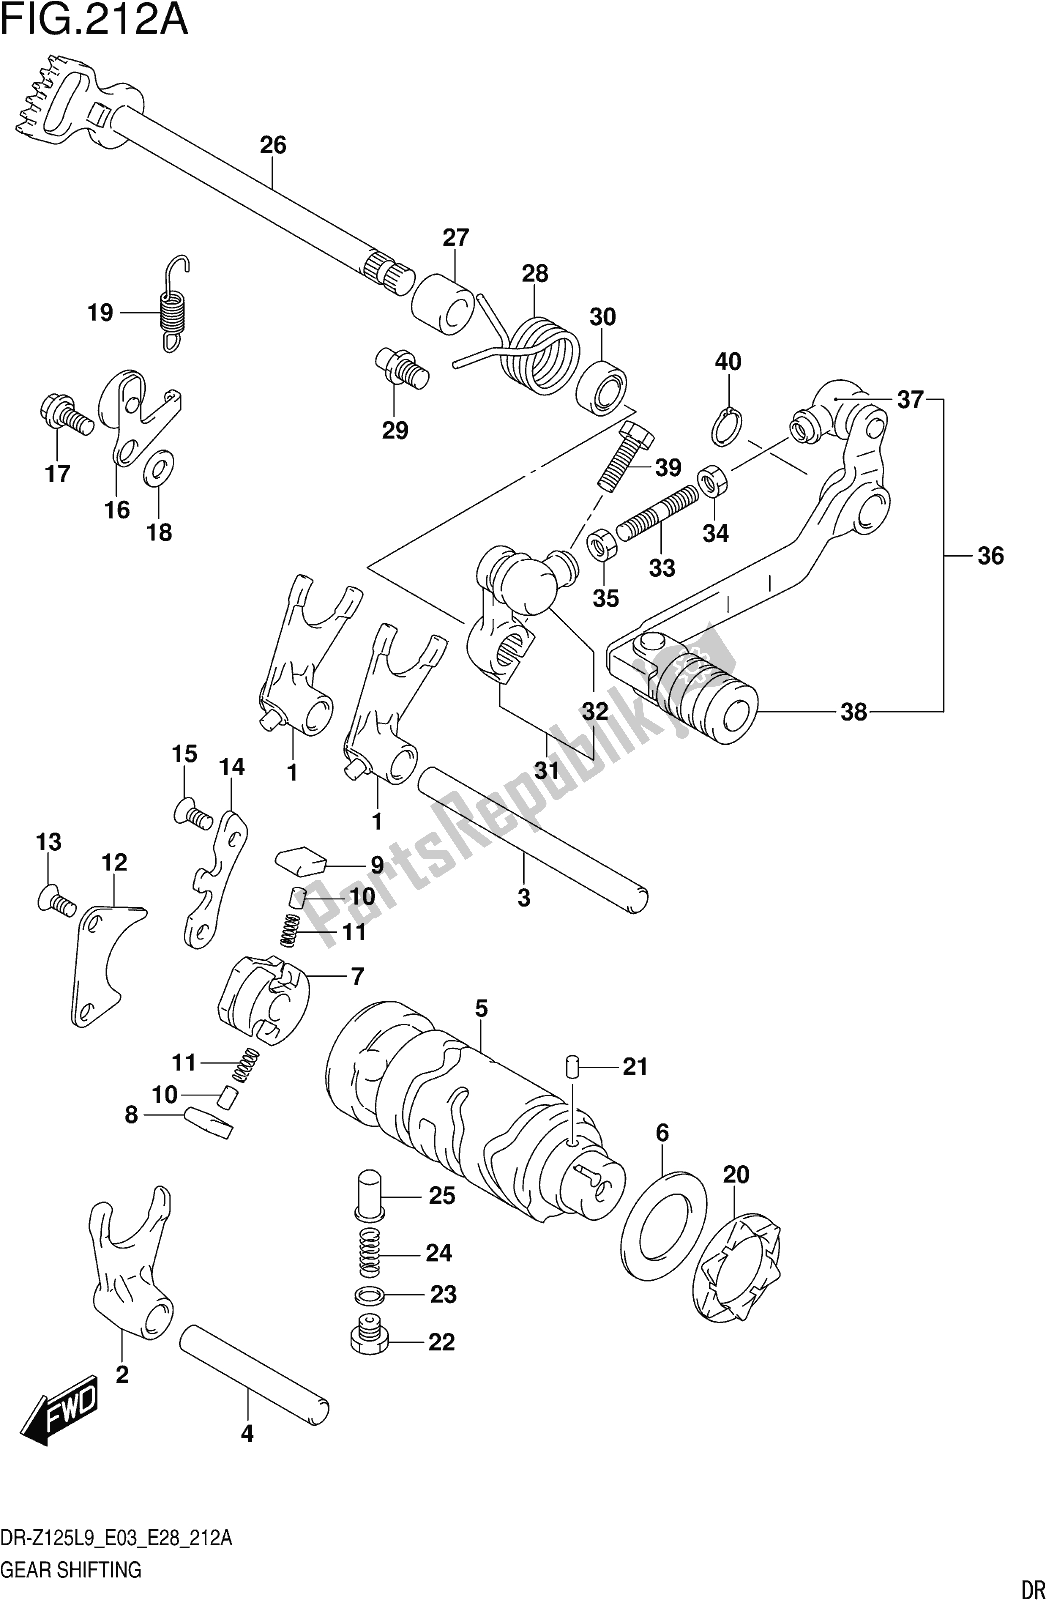 All parts for the Fig. 212a Gear Shifting of the Suzuki DR-Z 125 2019